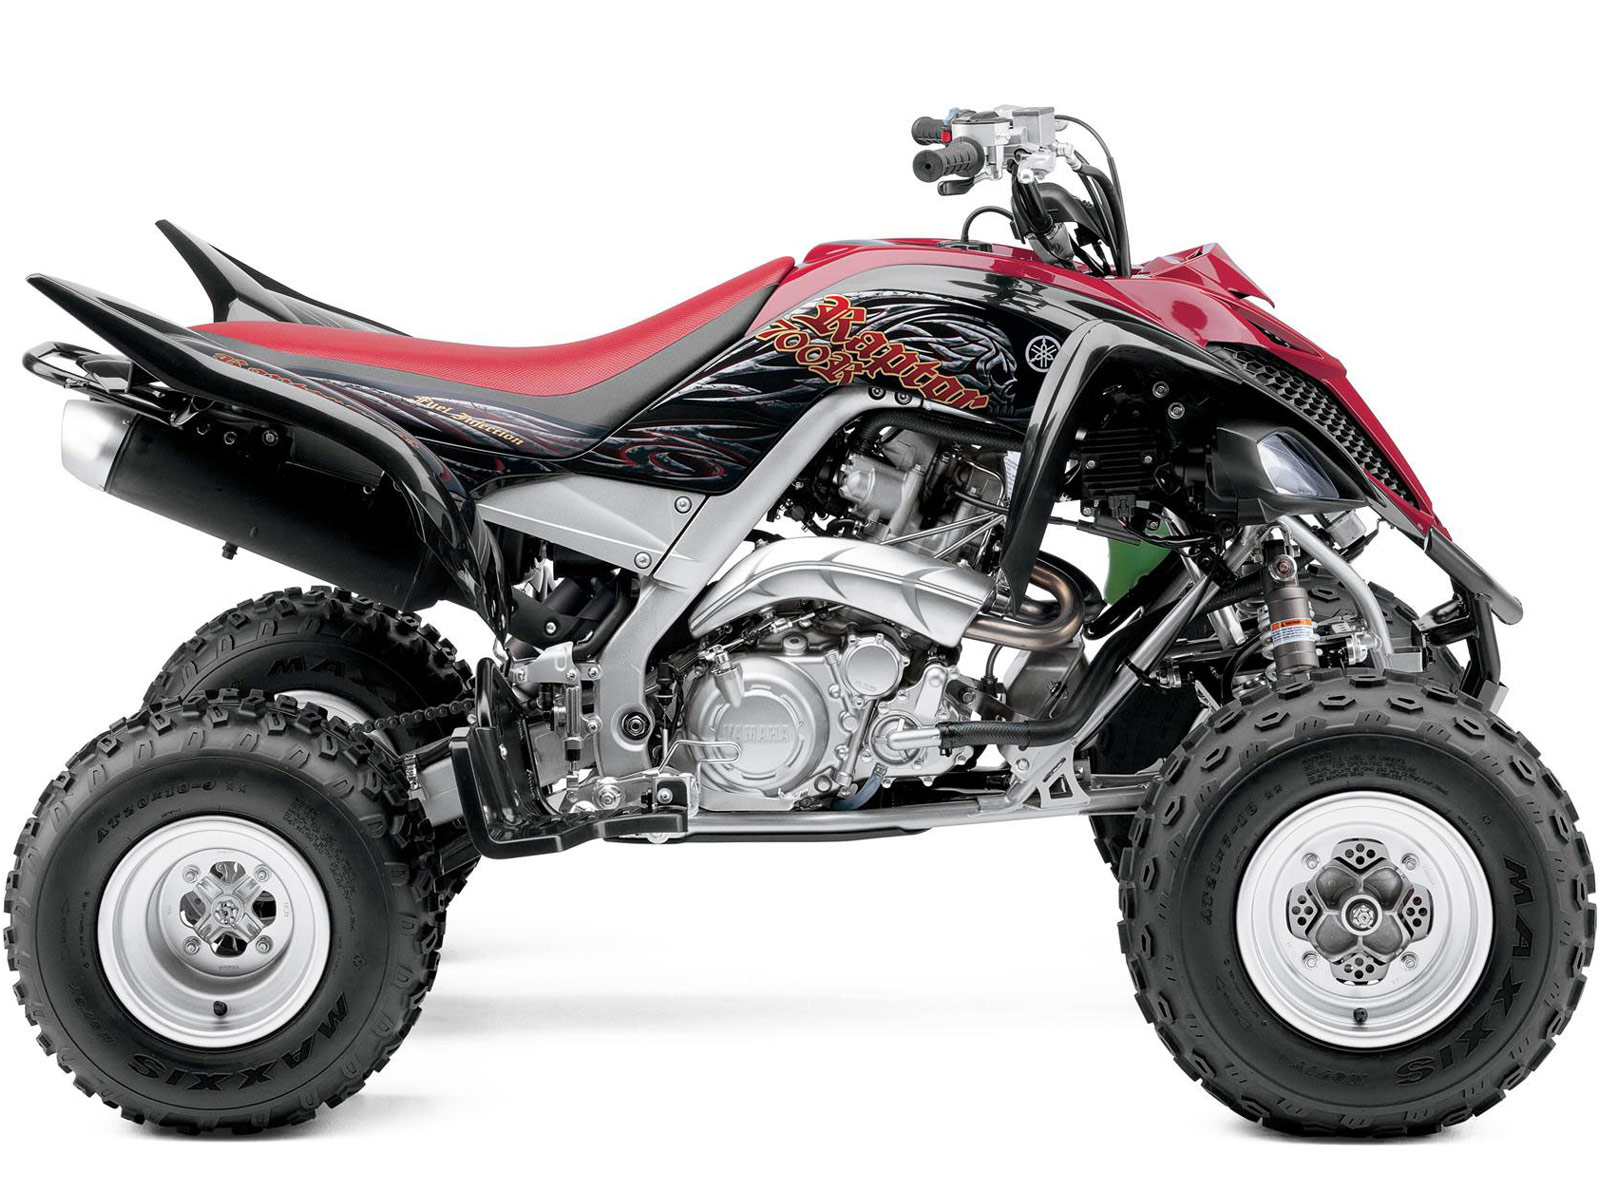 Yamaha ATV Pictures 2013 Raptor 700R SE specifications